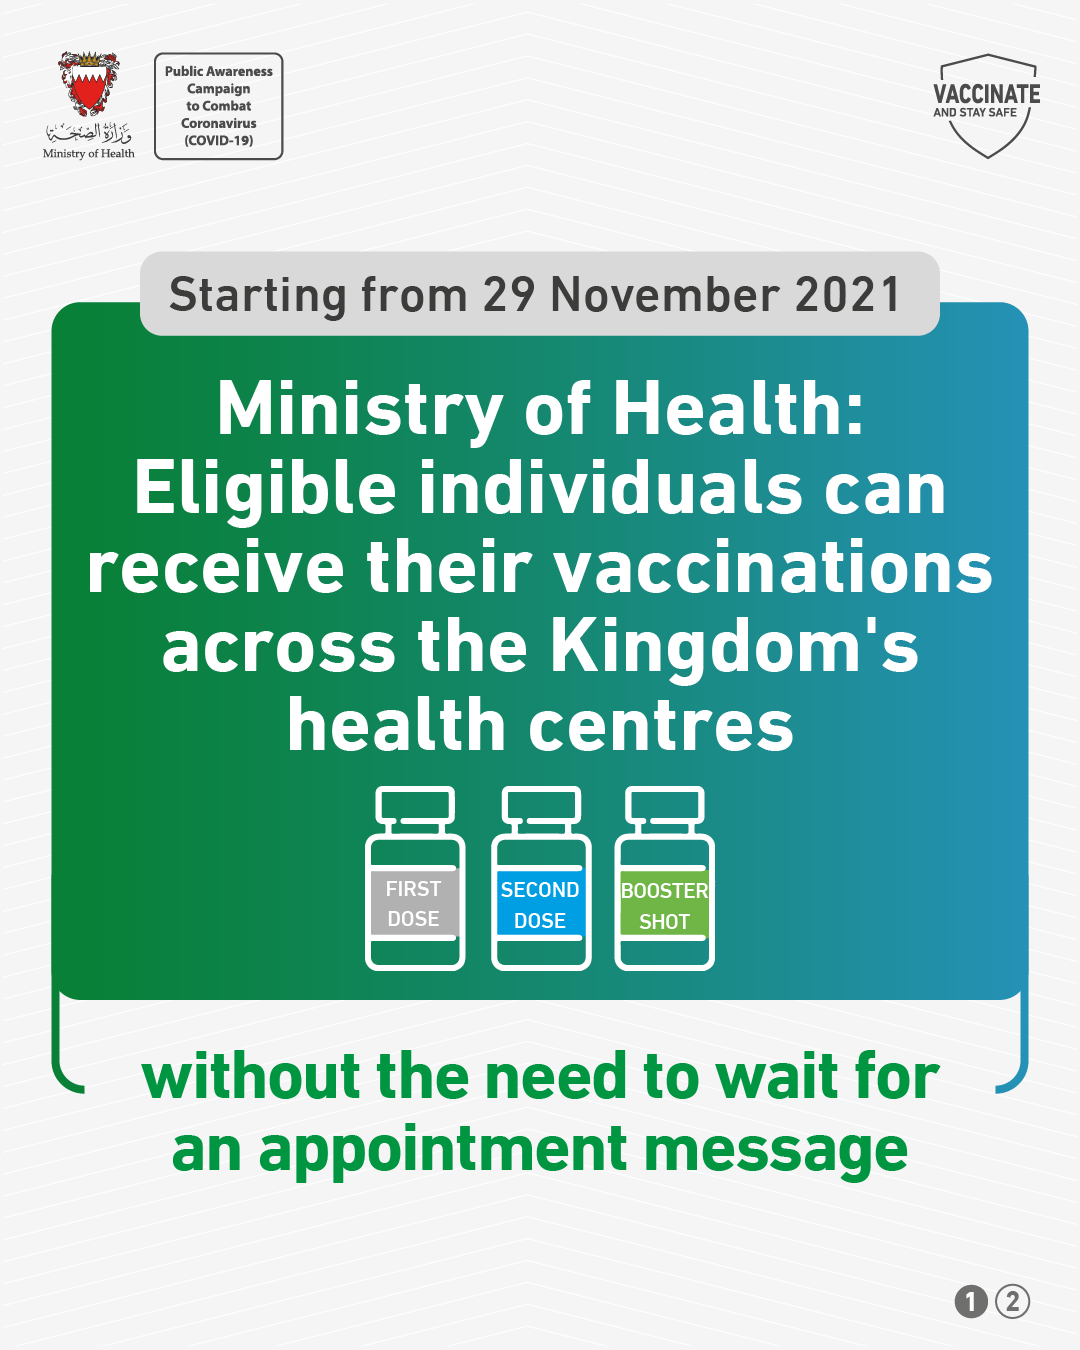 Eligible individuals can receive their vaccinations across the Kingdom's health centres